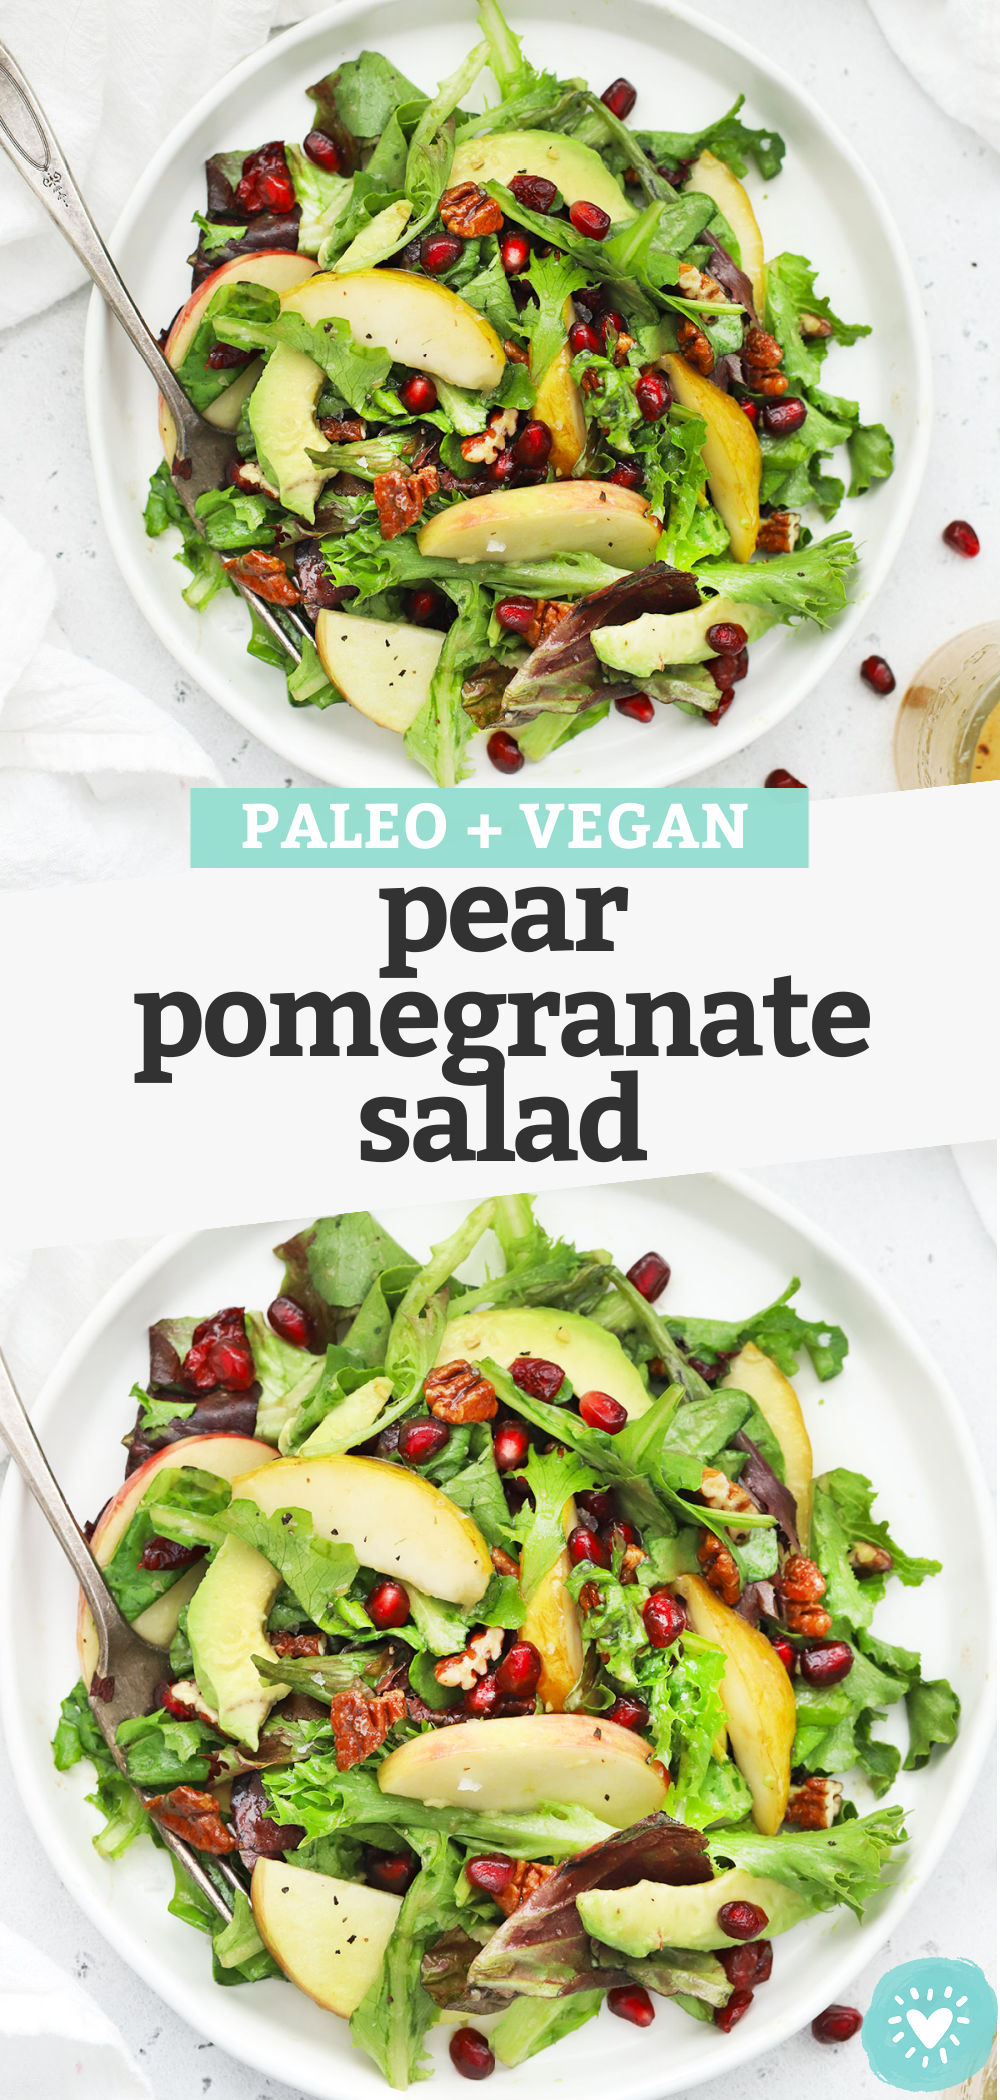 Pear Pomegranate Salad  - This pear and pomegranate salad has a beautiful mix of color and flavor. You'll love the simple dressing that ties it all together! (Gluten-Free + Vegan) // Pomegranate Salad Recipe // Side Salad // Holiday salad // Christmas side dish // Thanksgiving side dish #pomegranate #salad #sidedish #sidesalad #paleo #vegan